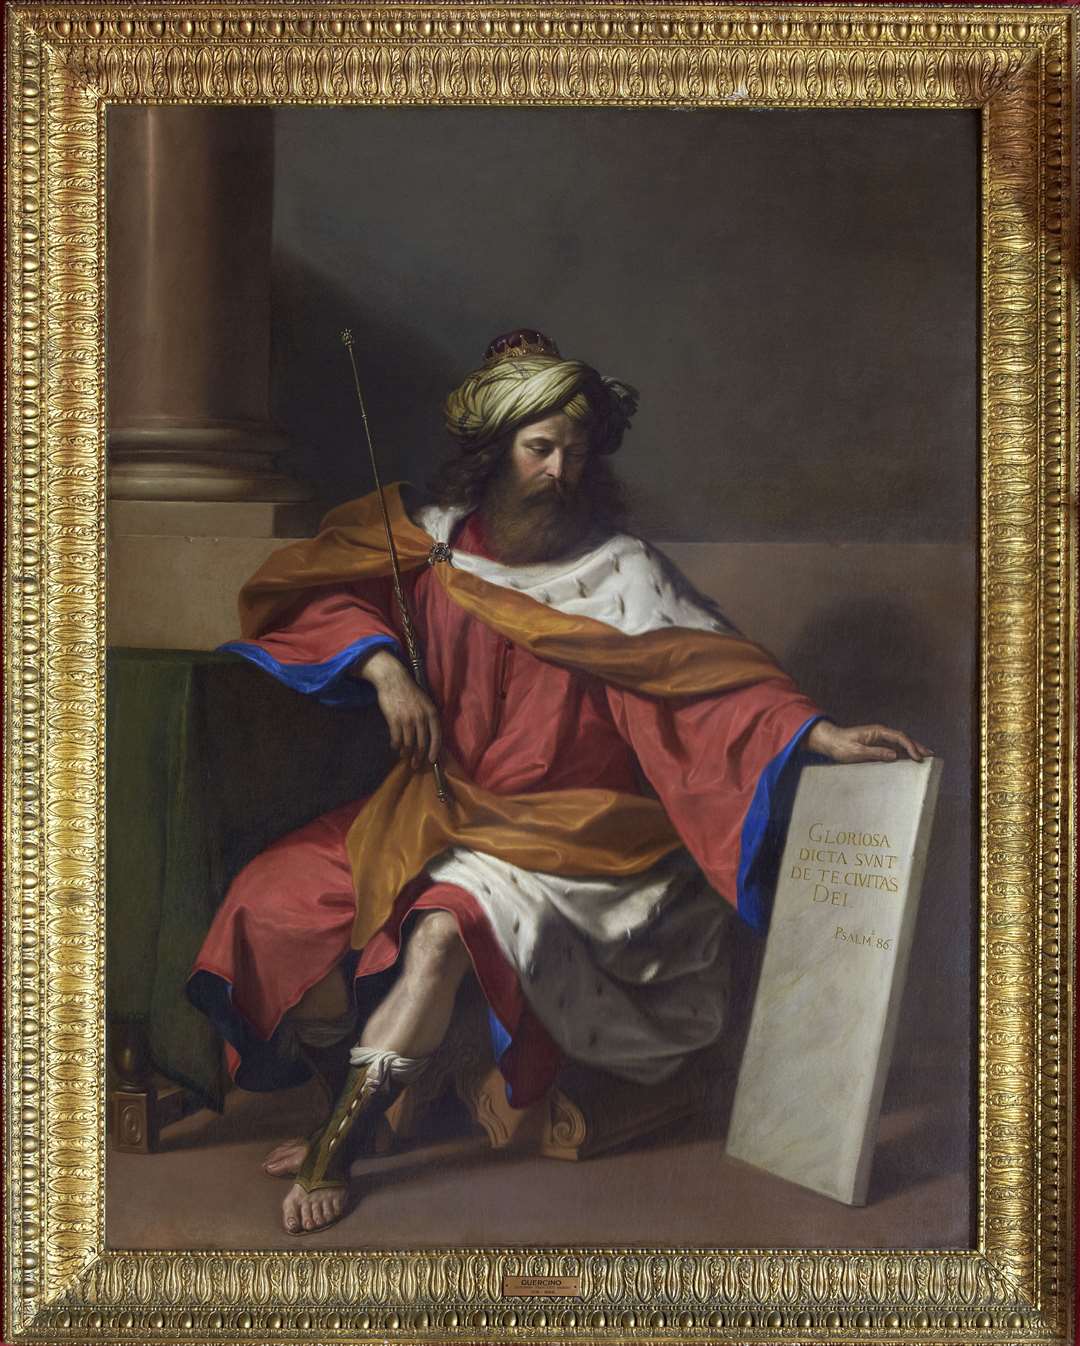 The Italian artist Guercino painted King David in 1651 (Waddesdon Image Library/PA)